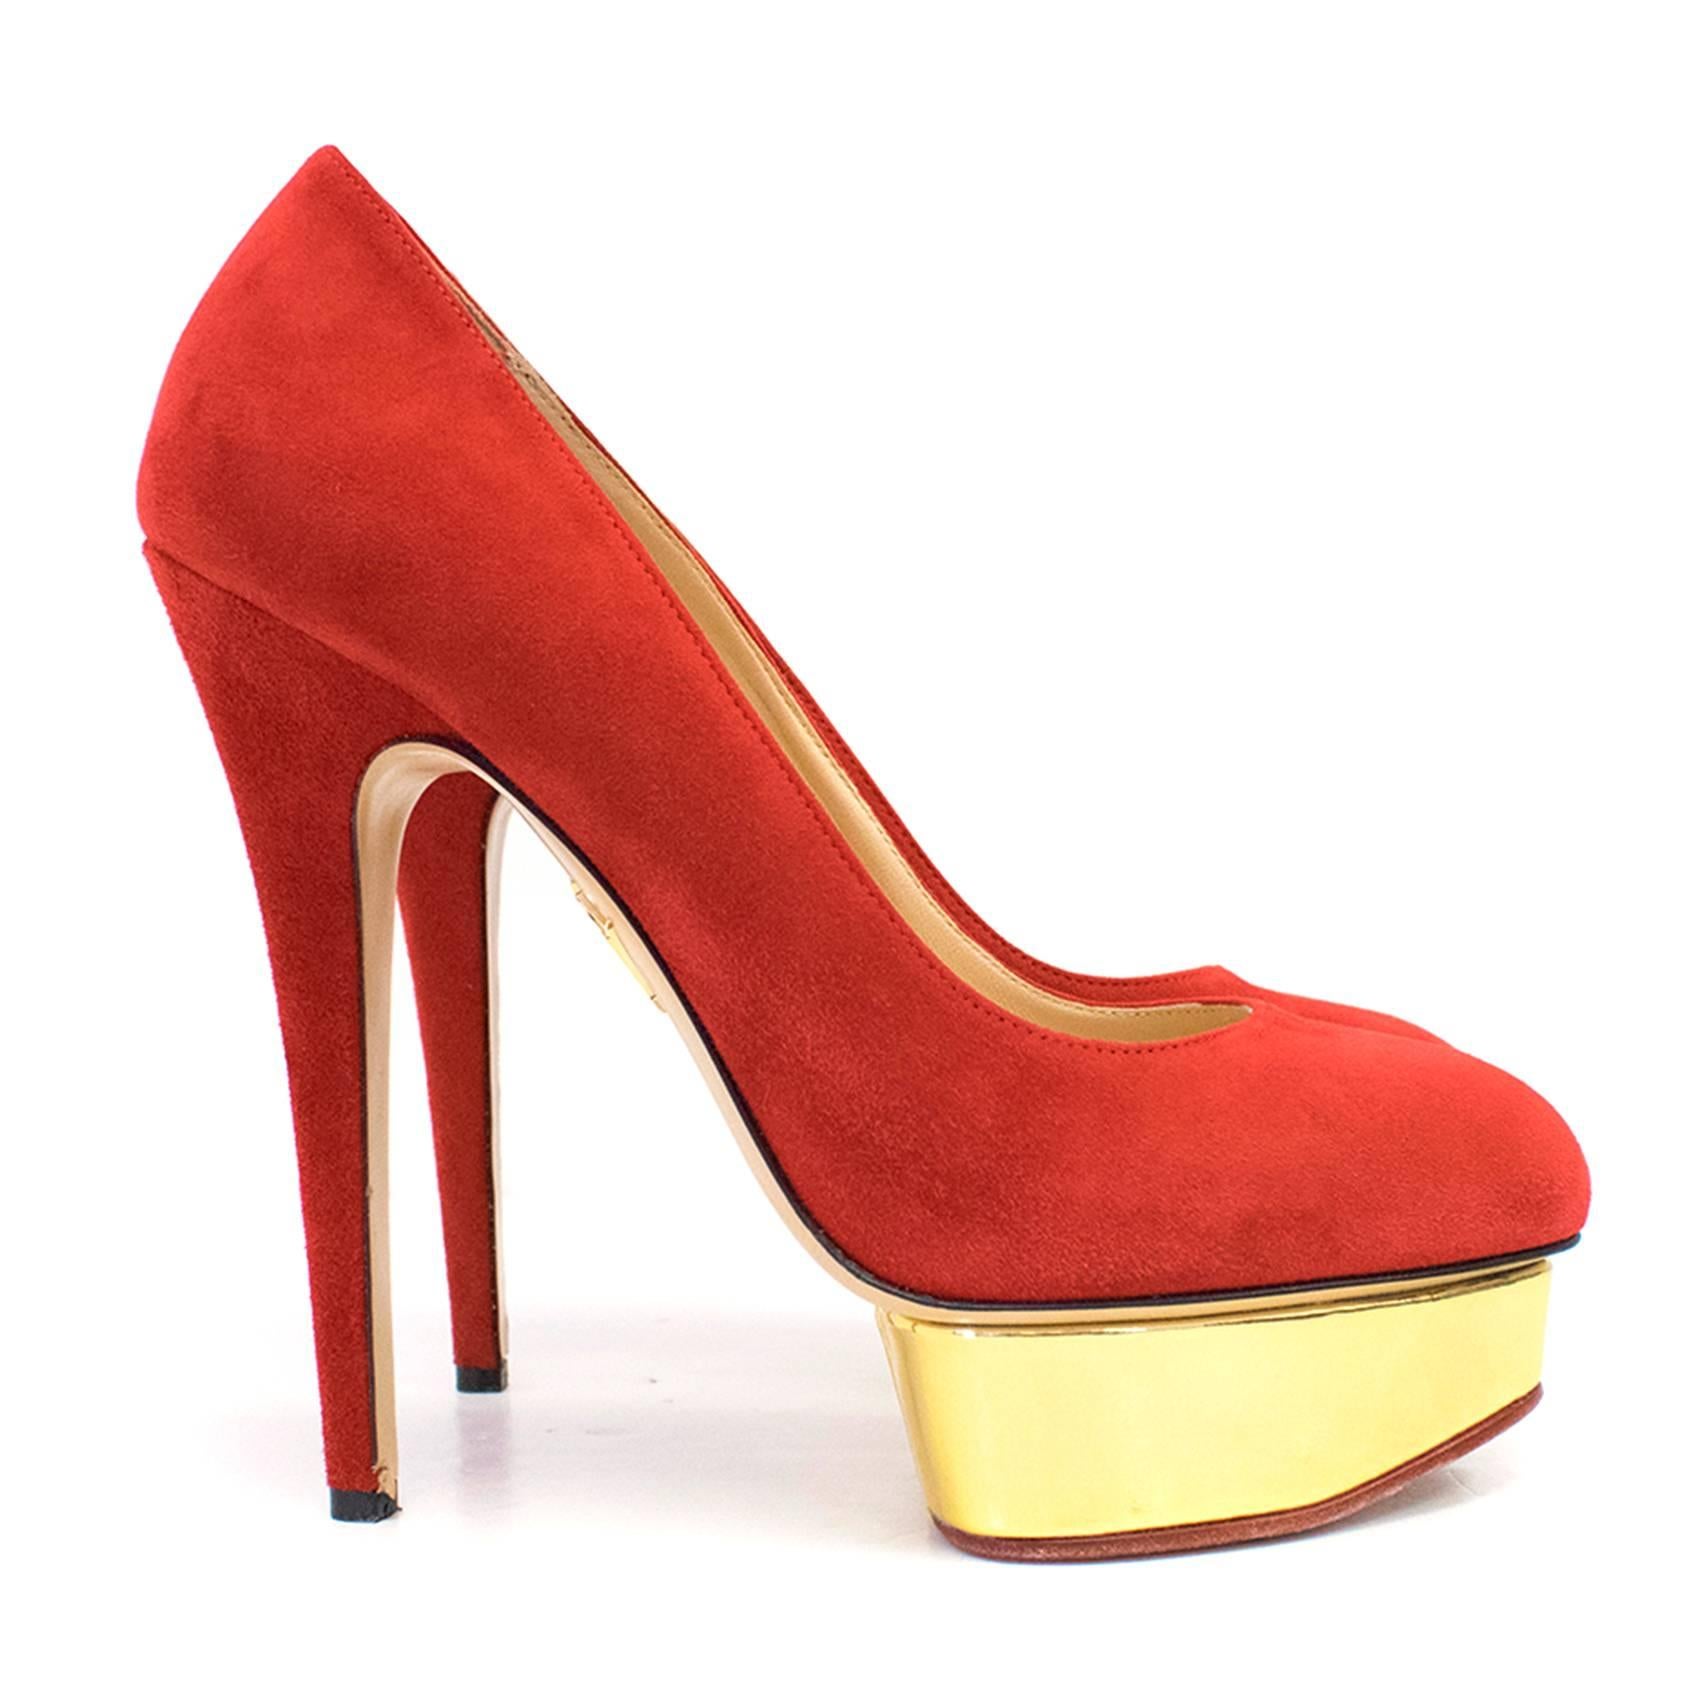 Charlotte Olympia red suede heels in a platform stiletto style featuring a metallic gold accent platform and almond toes. 

Very minor wear at the tip of the heel.
Condition: 9/10

Size IT: 40
Size UK: 7
Size US: 10

Measurements Approx:
length -